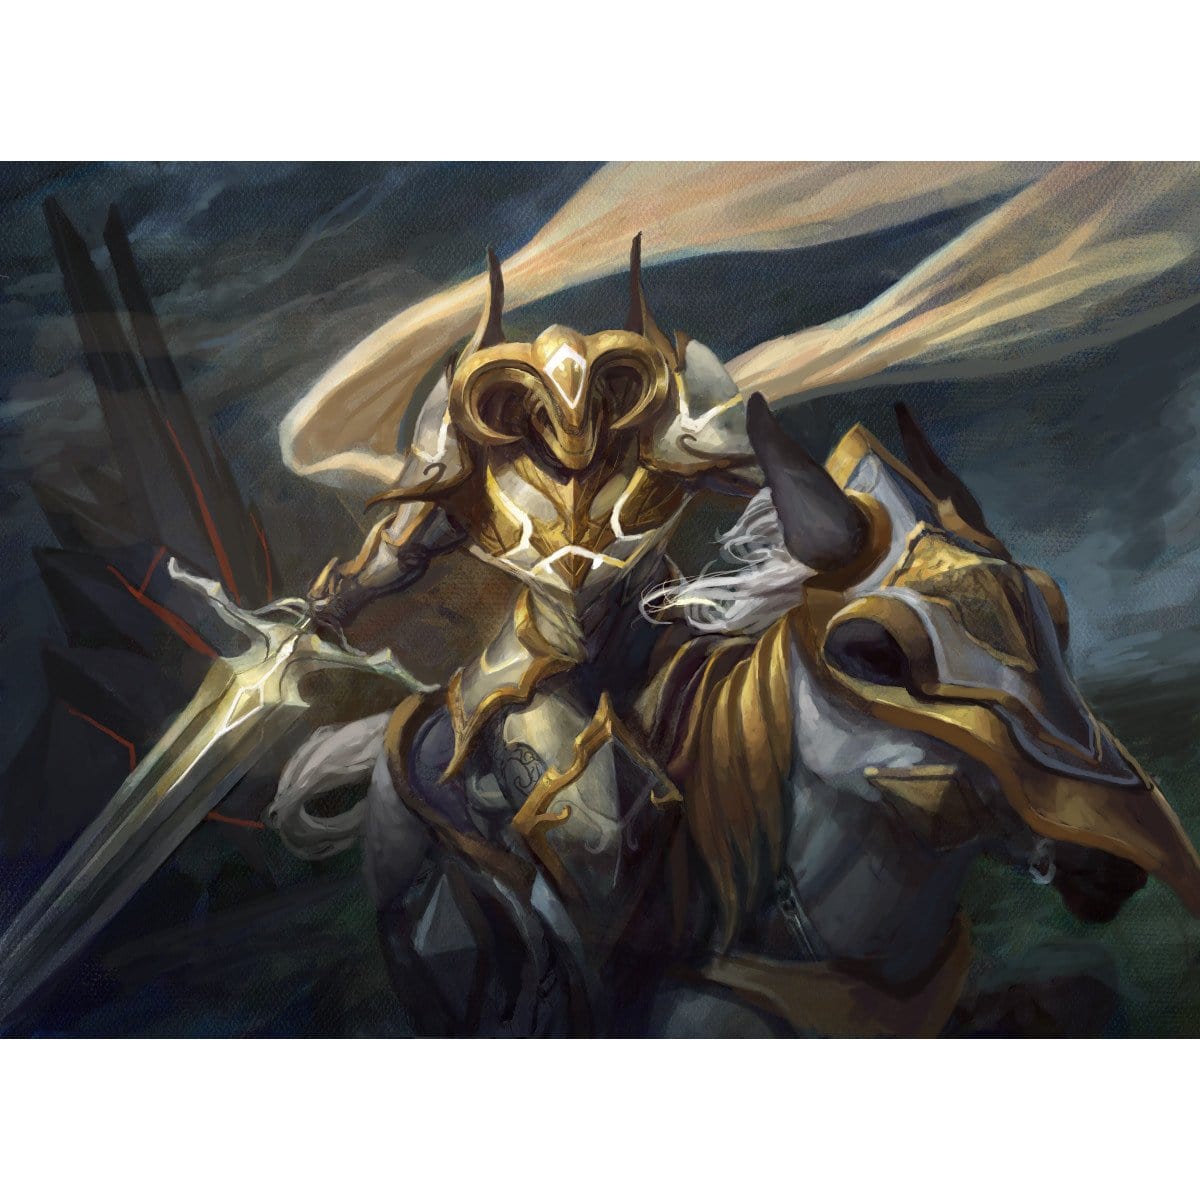 Knight of Glory Print - Print - Original Magic Art - Accessories for Magic the Gathering and other card games